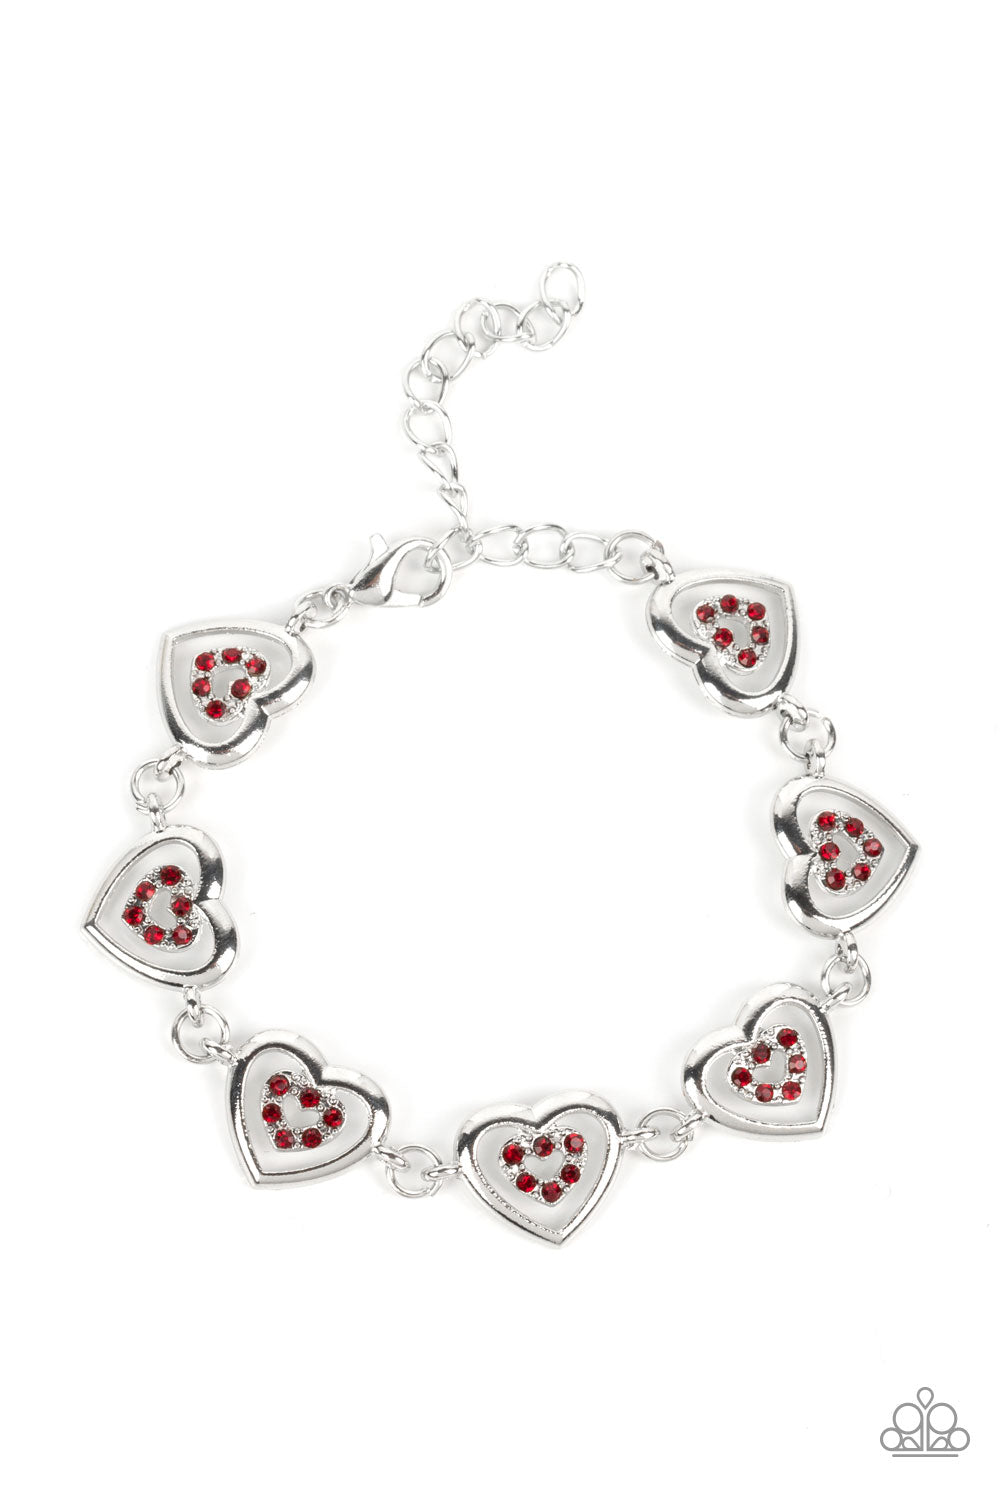 Catching Feelings - Red Heart Bracelet - Paparazzi Accessories - Dotted with dainty siam rhinestones, airy silver heart silhouettes are affixed to the points of larger silver heart frames. The two dimensional heart frames link together around the wrist in a flirtatious finish. Features an adjustable clasp closure. Sold as one individual bracelet.